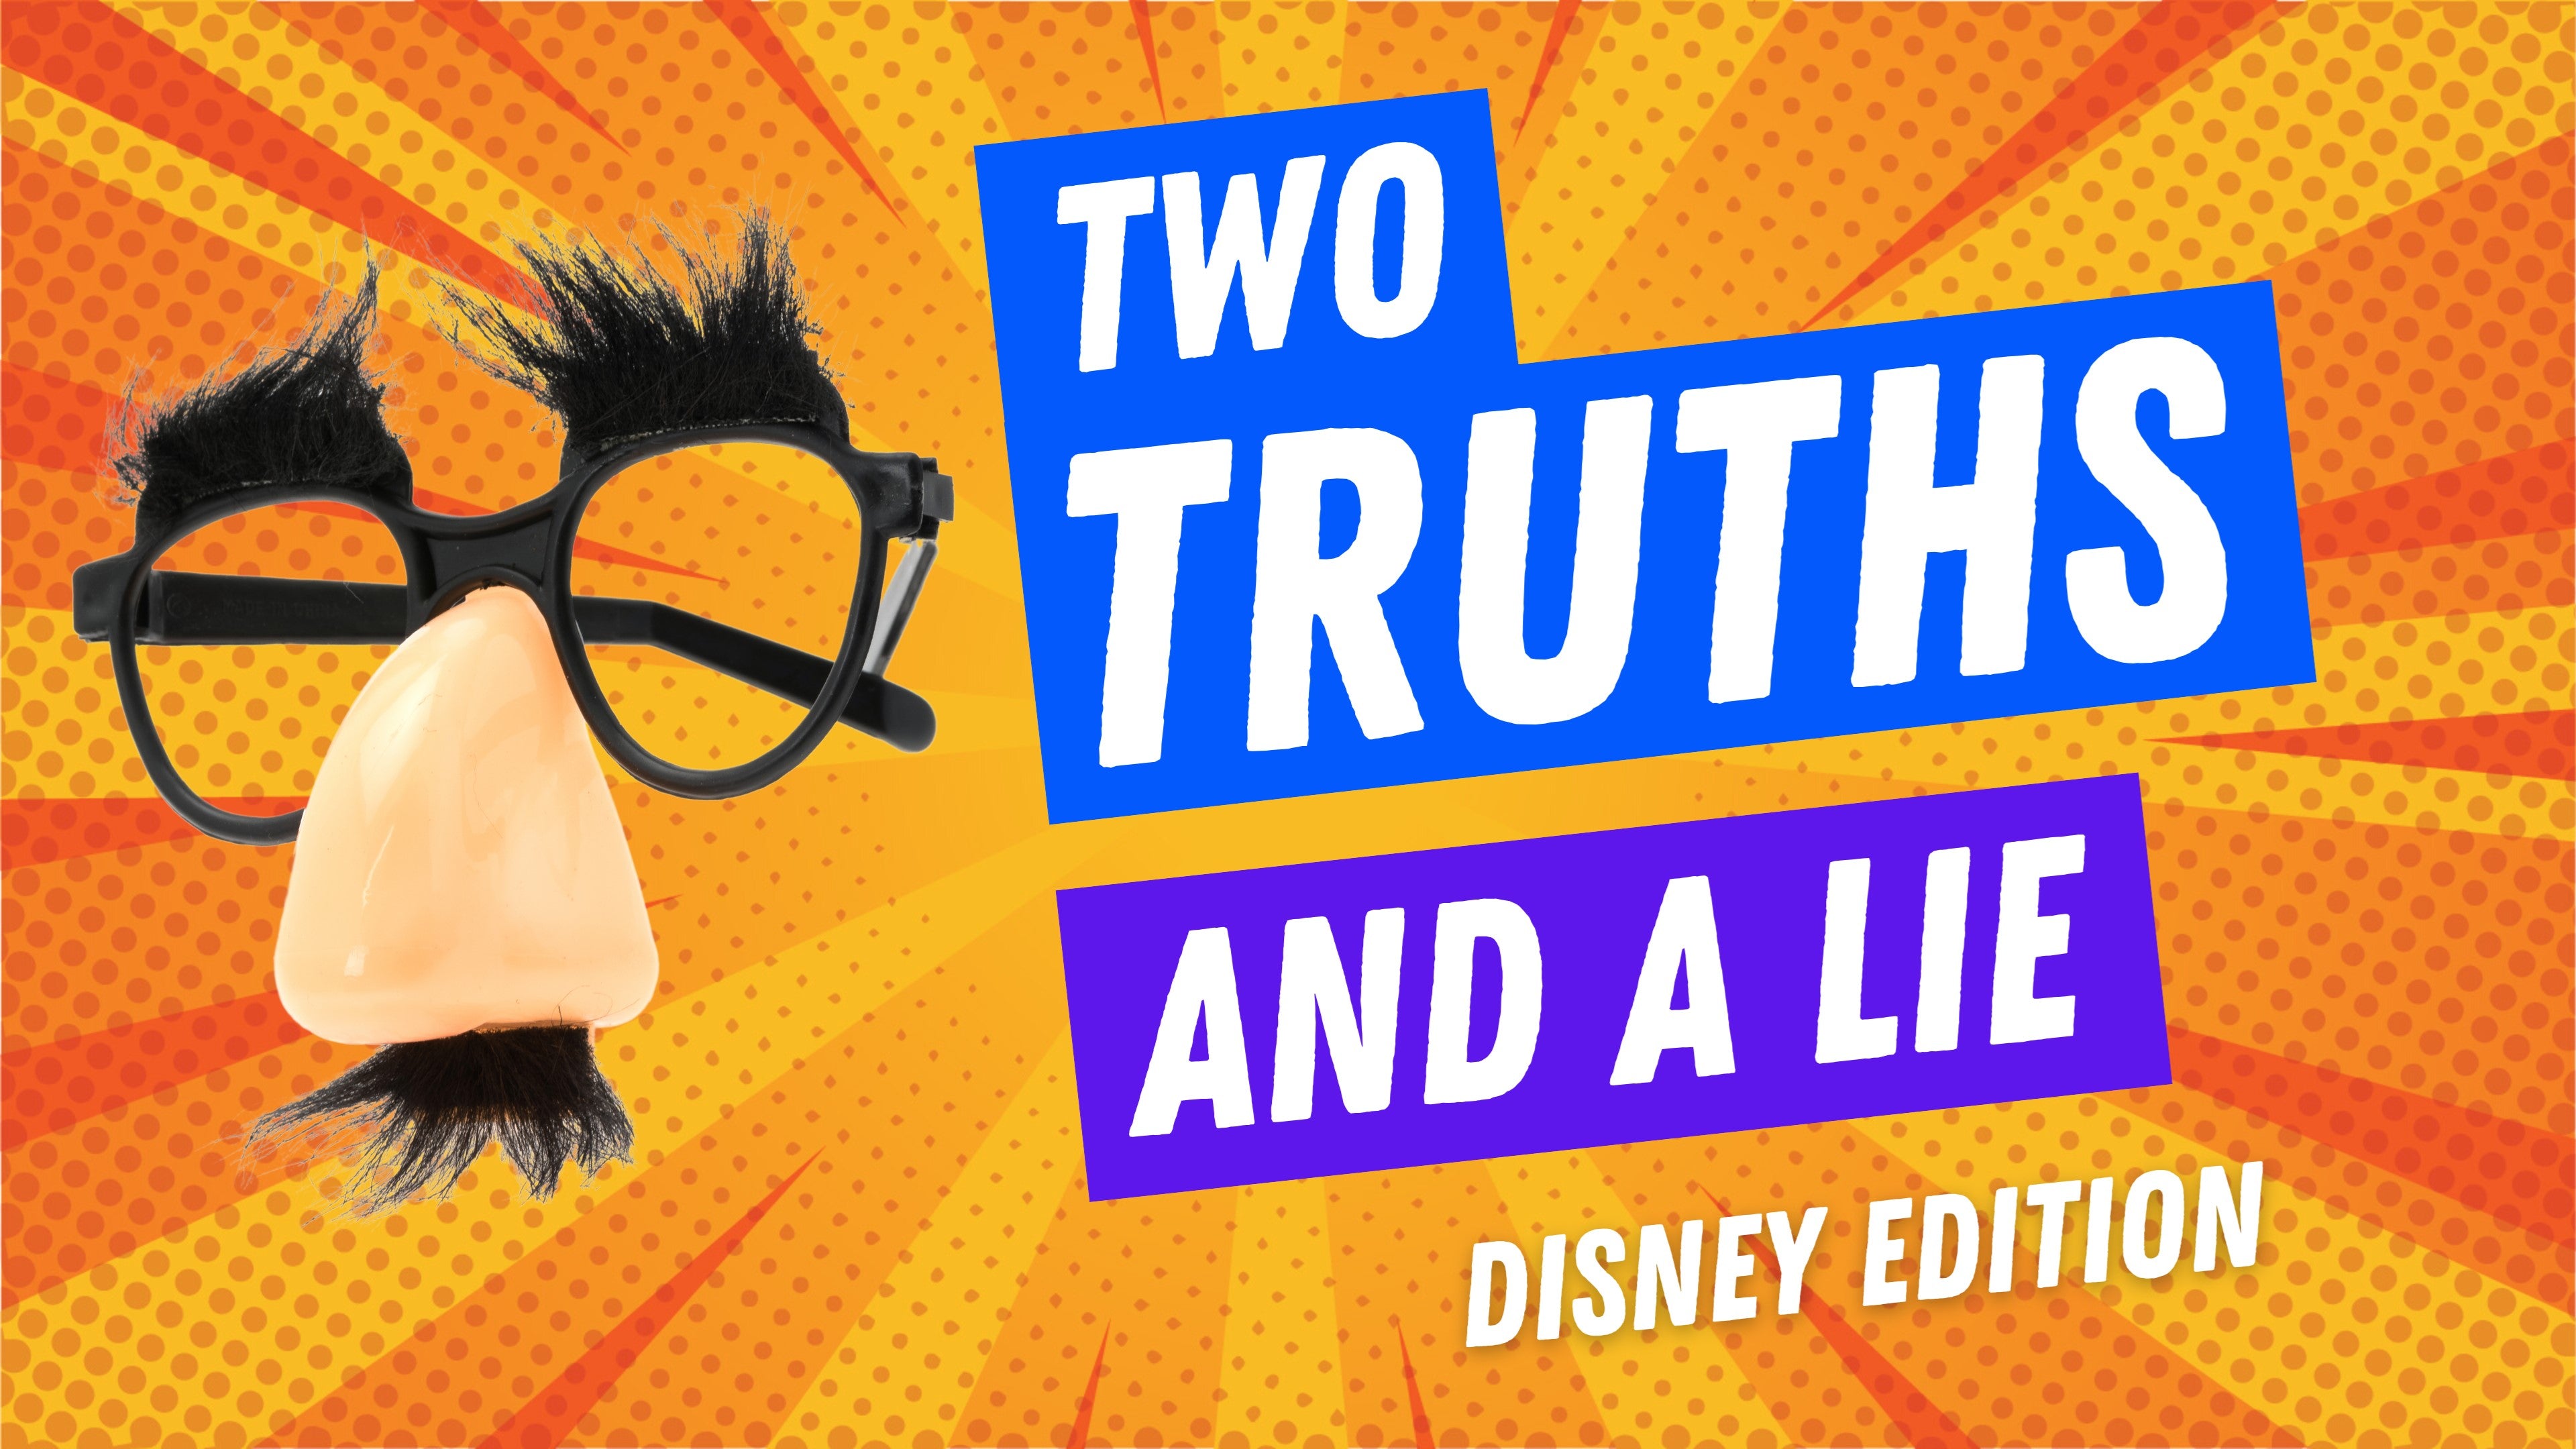 Two Truths And A Lie: Disney Edition